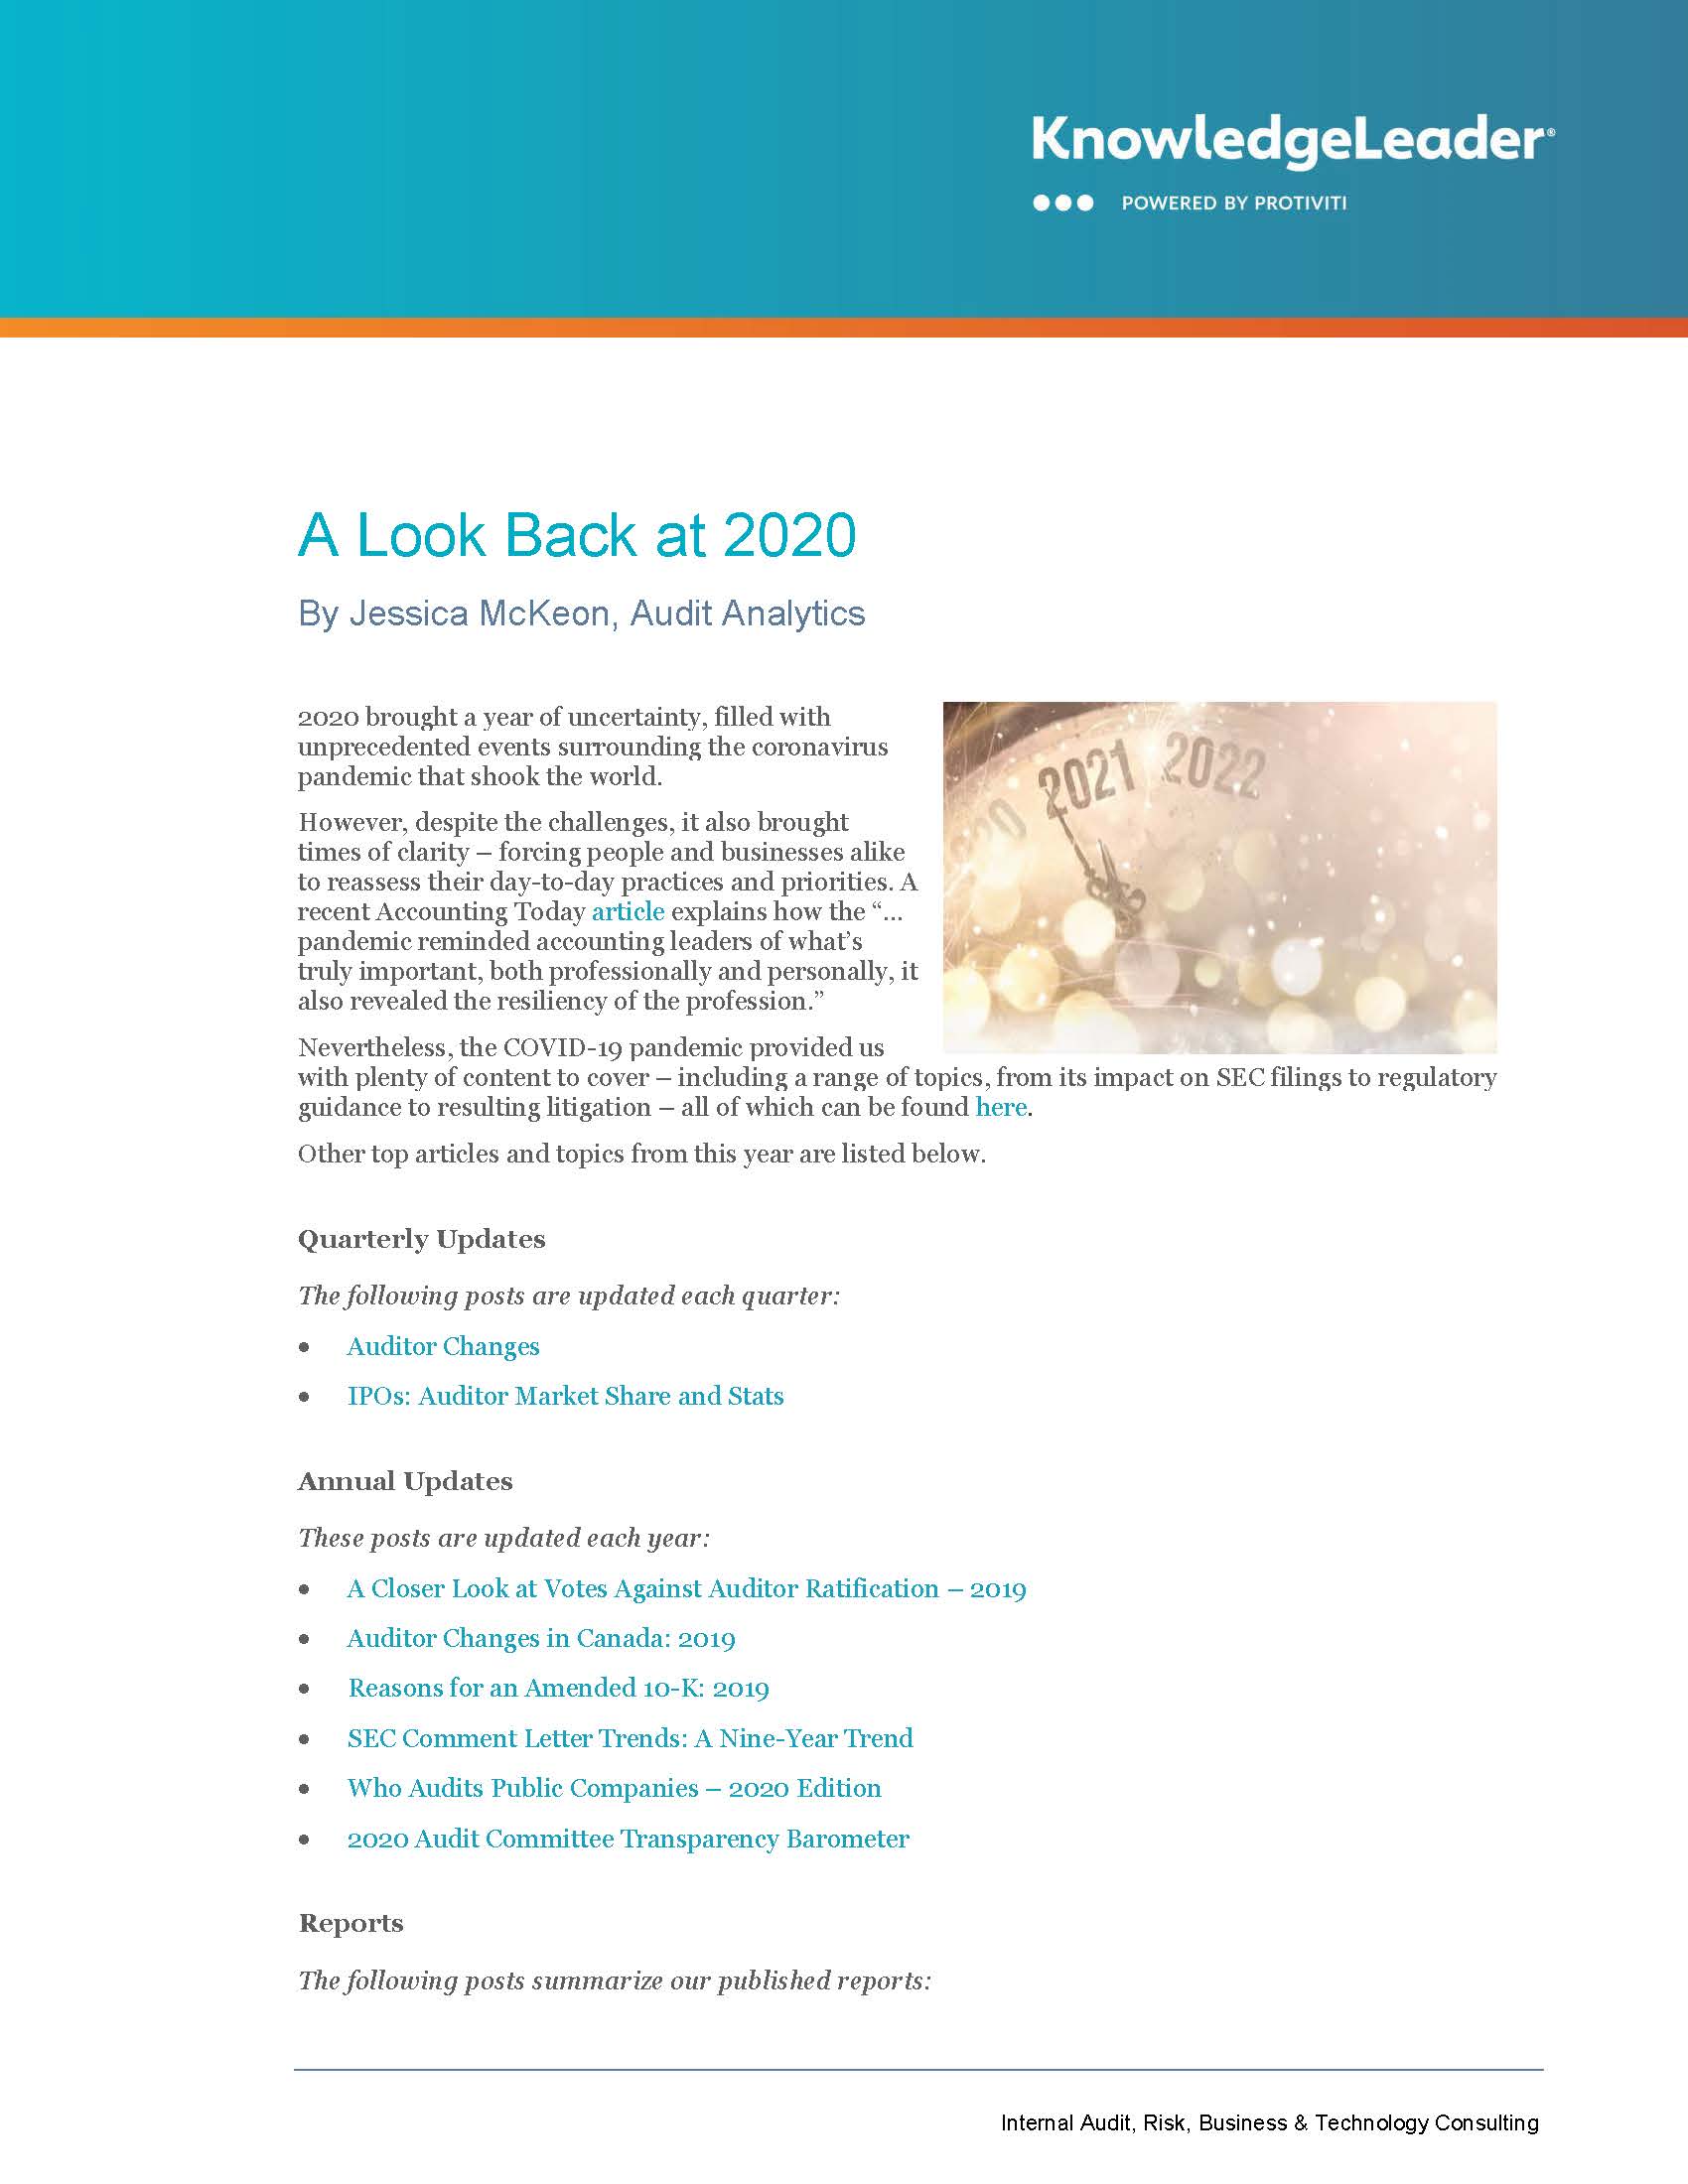 Screenshot of the first page of A Look Back at 2020